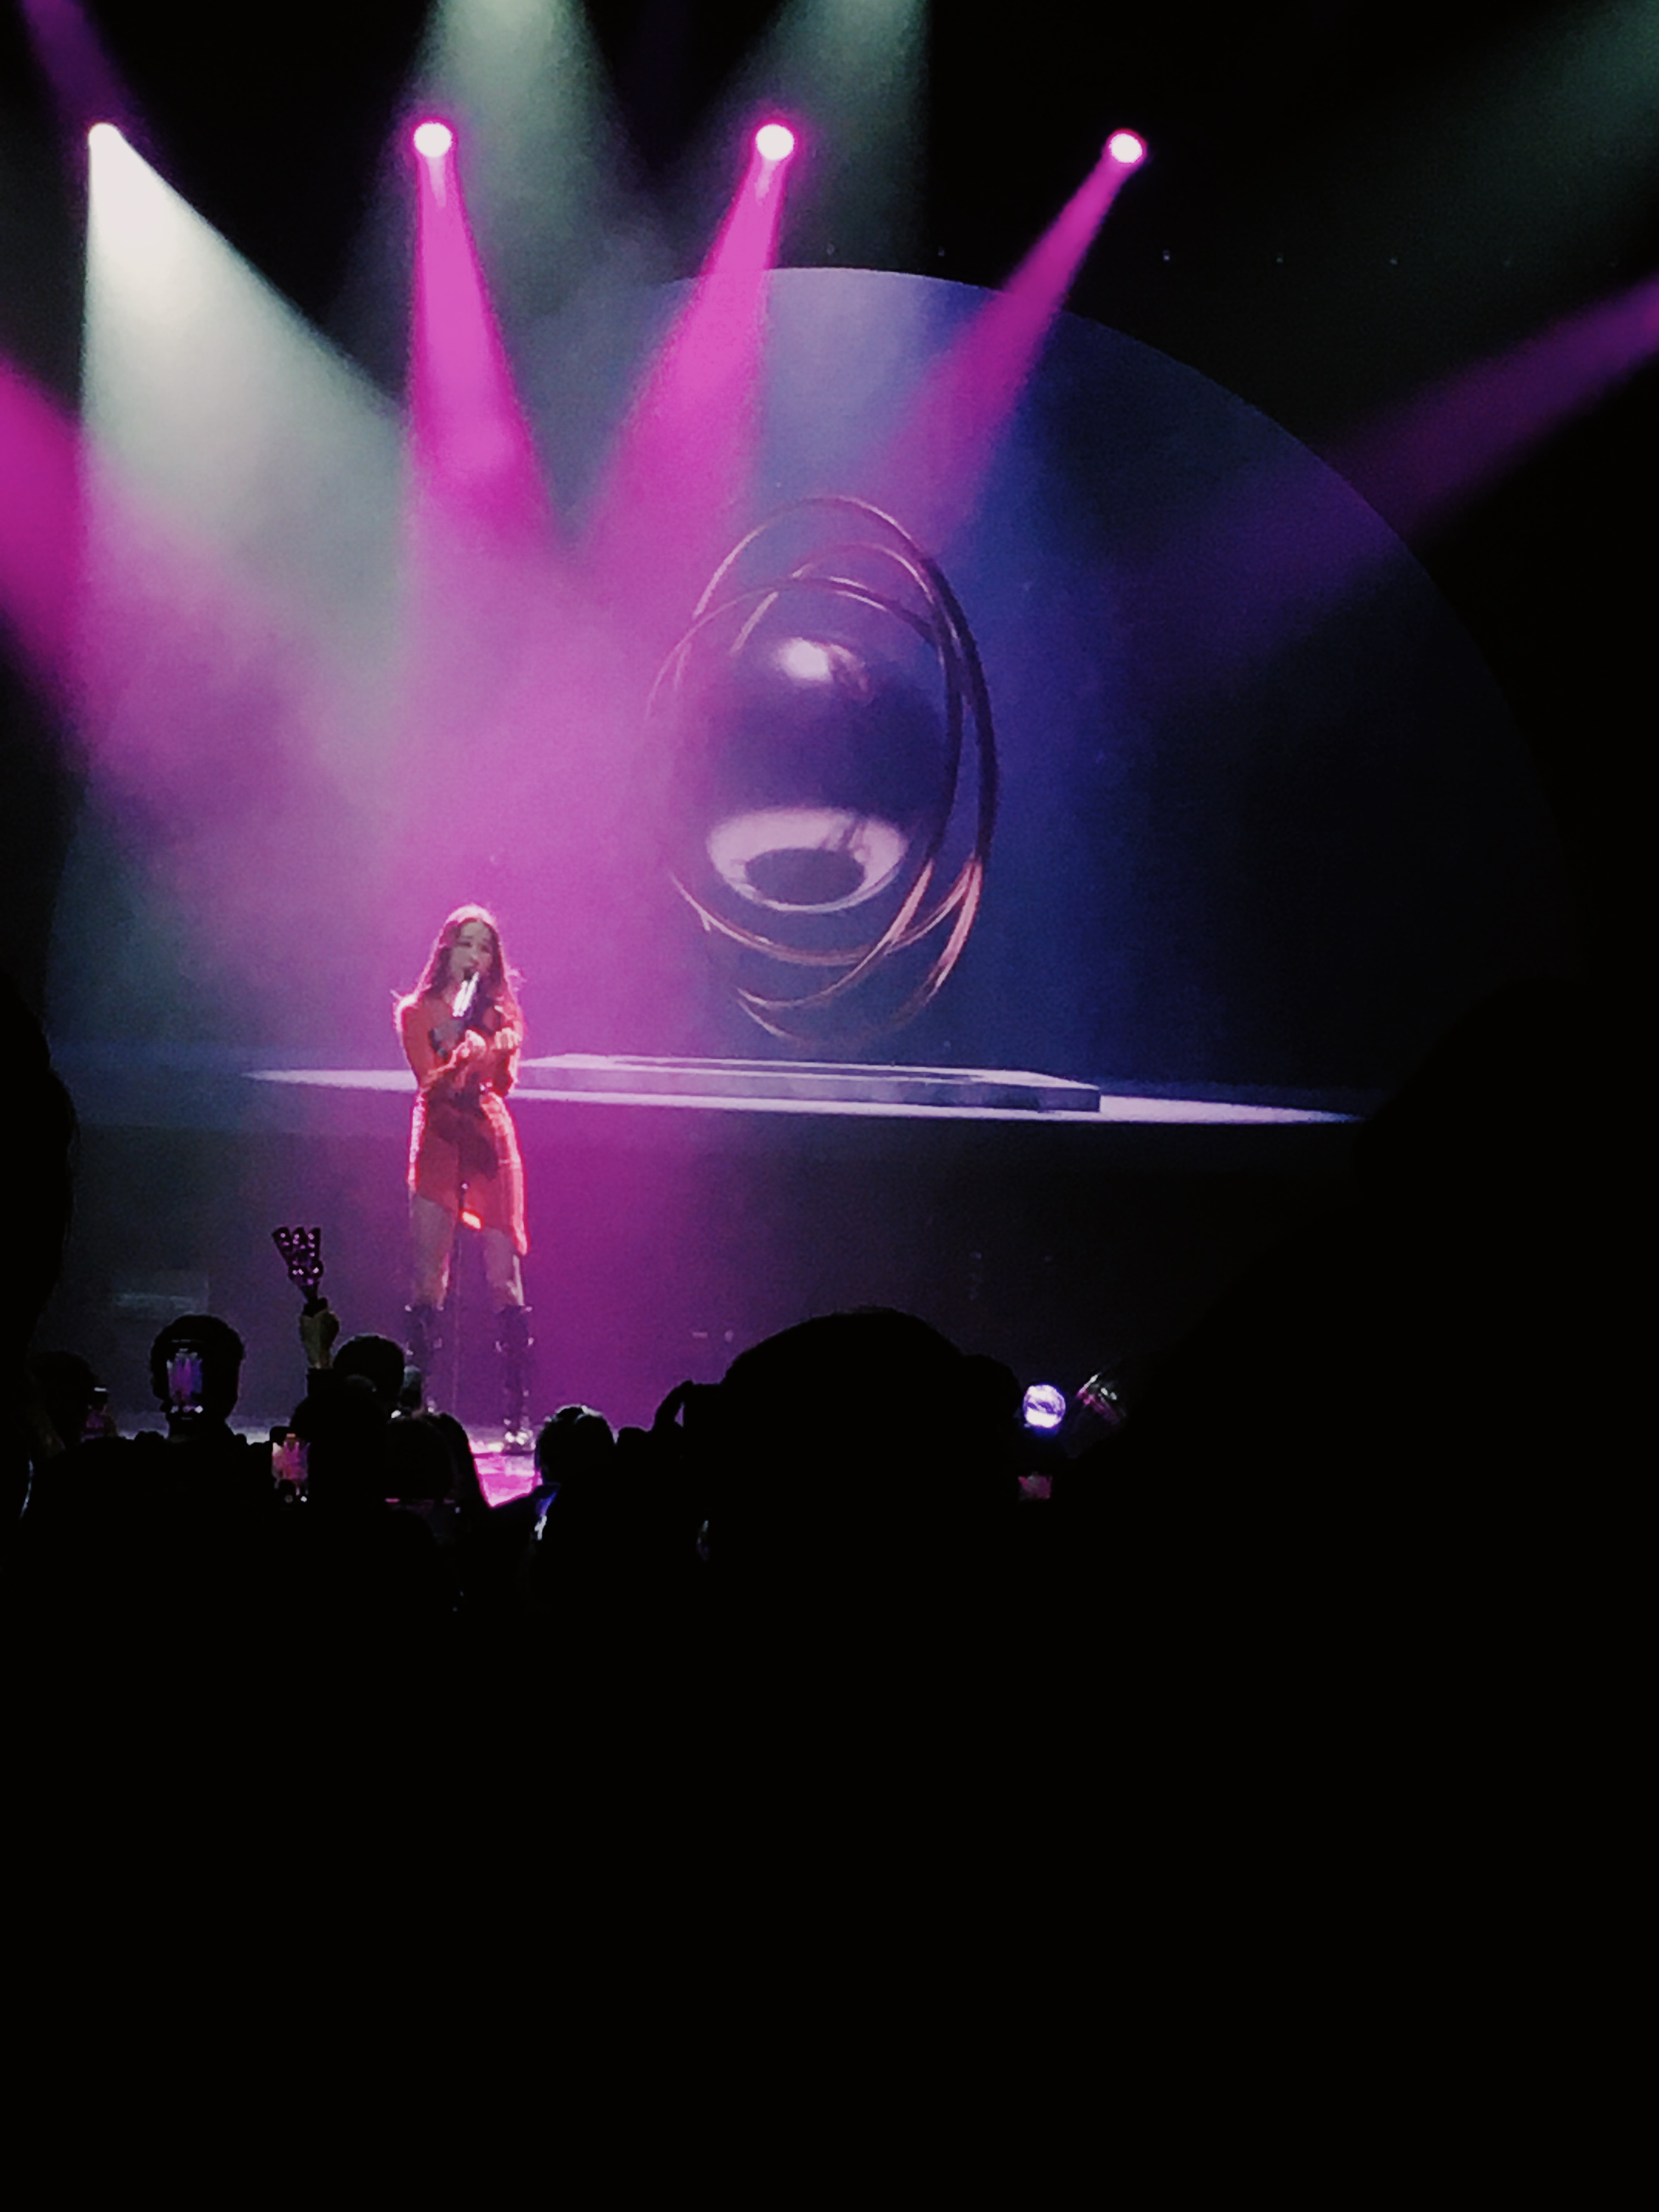 Zoomed in concert photo of Sunmi as she's singing under purple and blue lights.